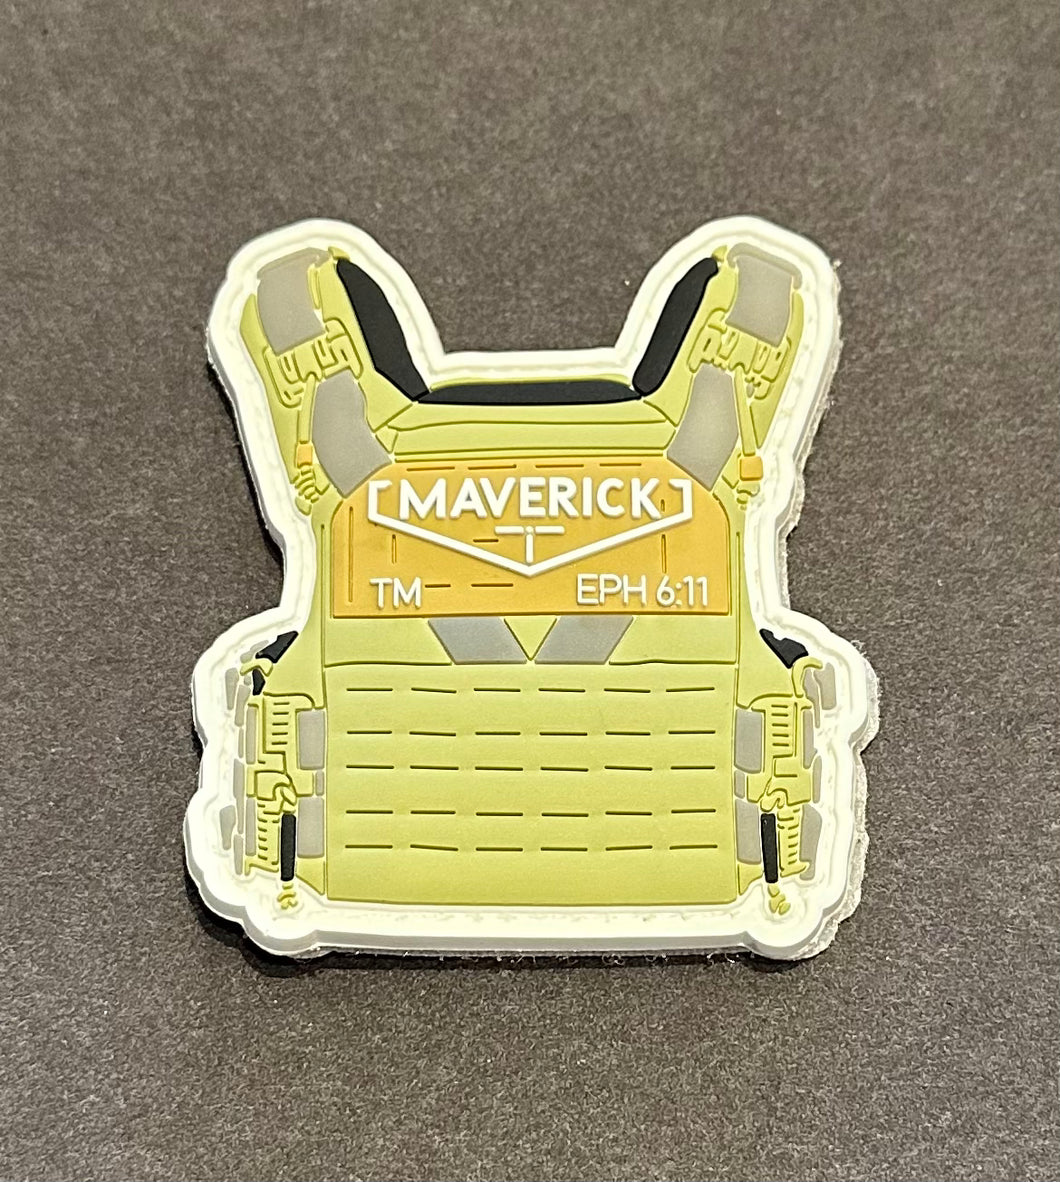 Glow in the Dark Maverick Carrier Patch